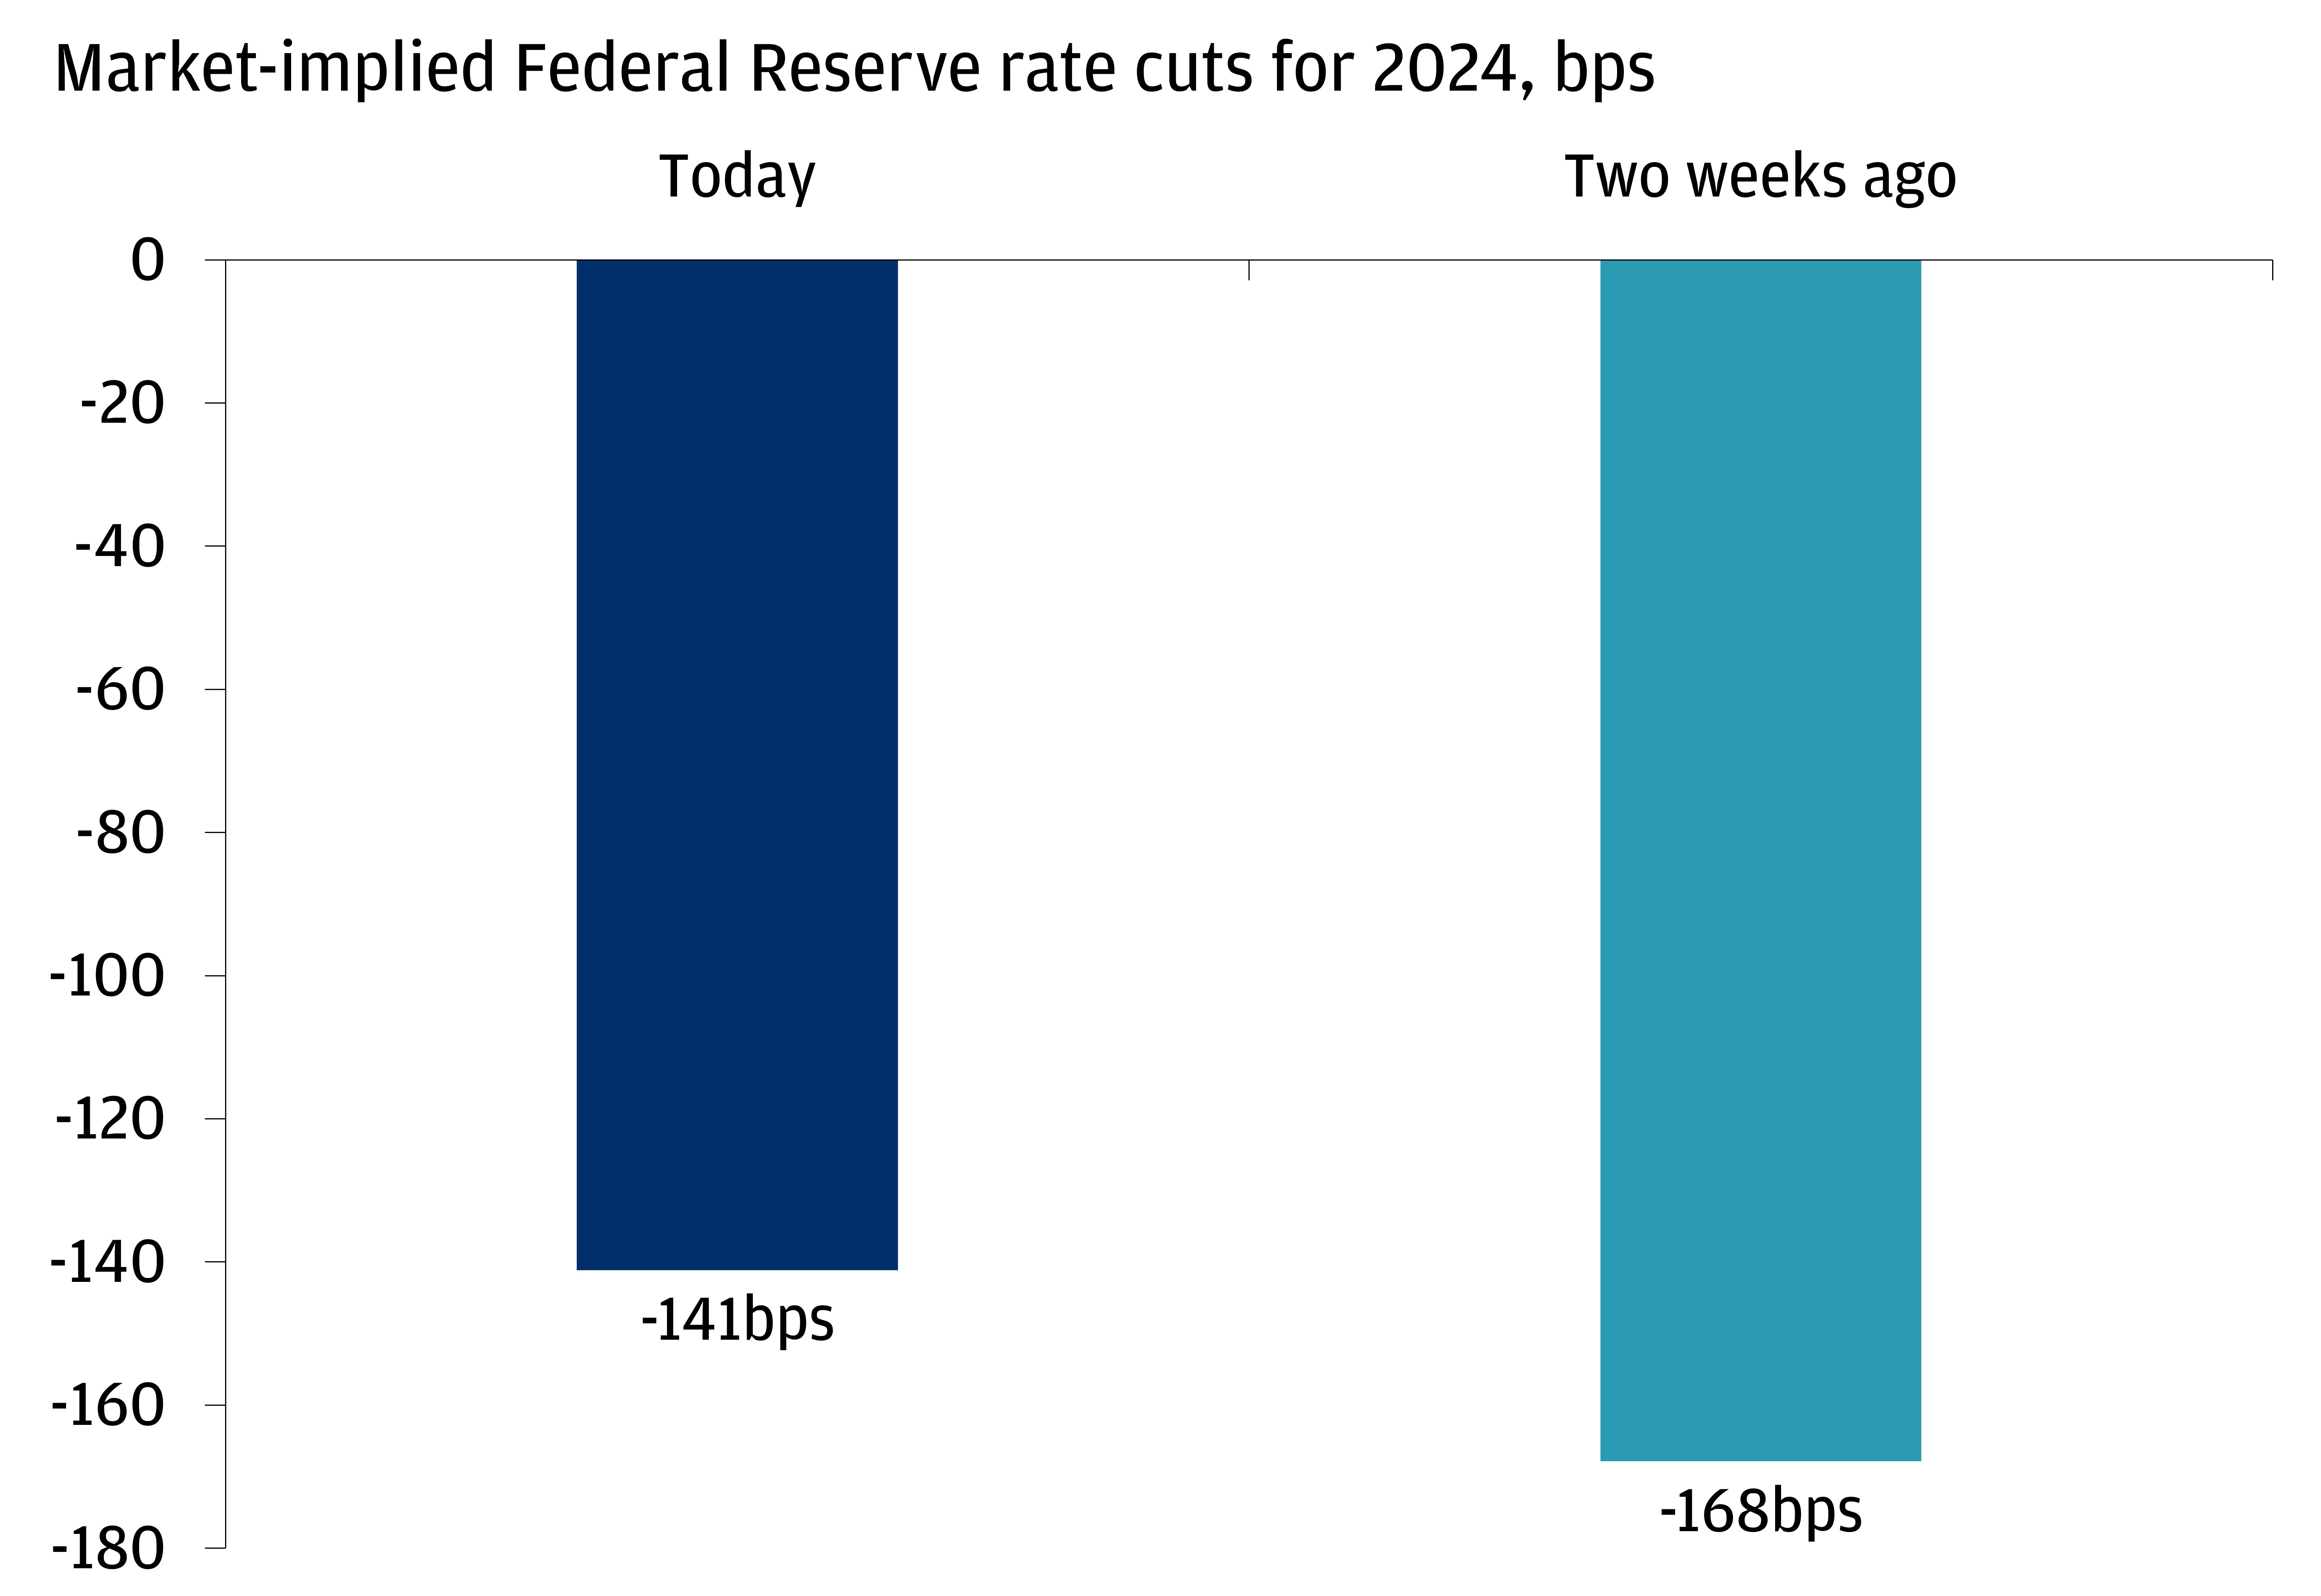 The chart shows the market-implied Federal Reserve rate cuts today at -141 bps versus two weeks ago at -168 bps. 